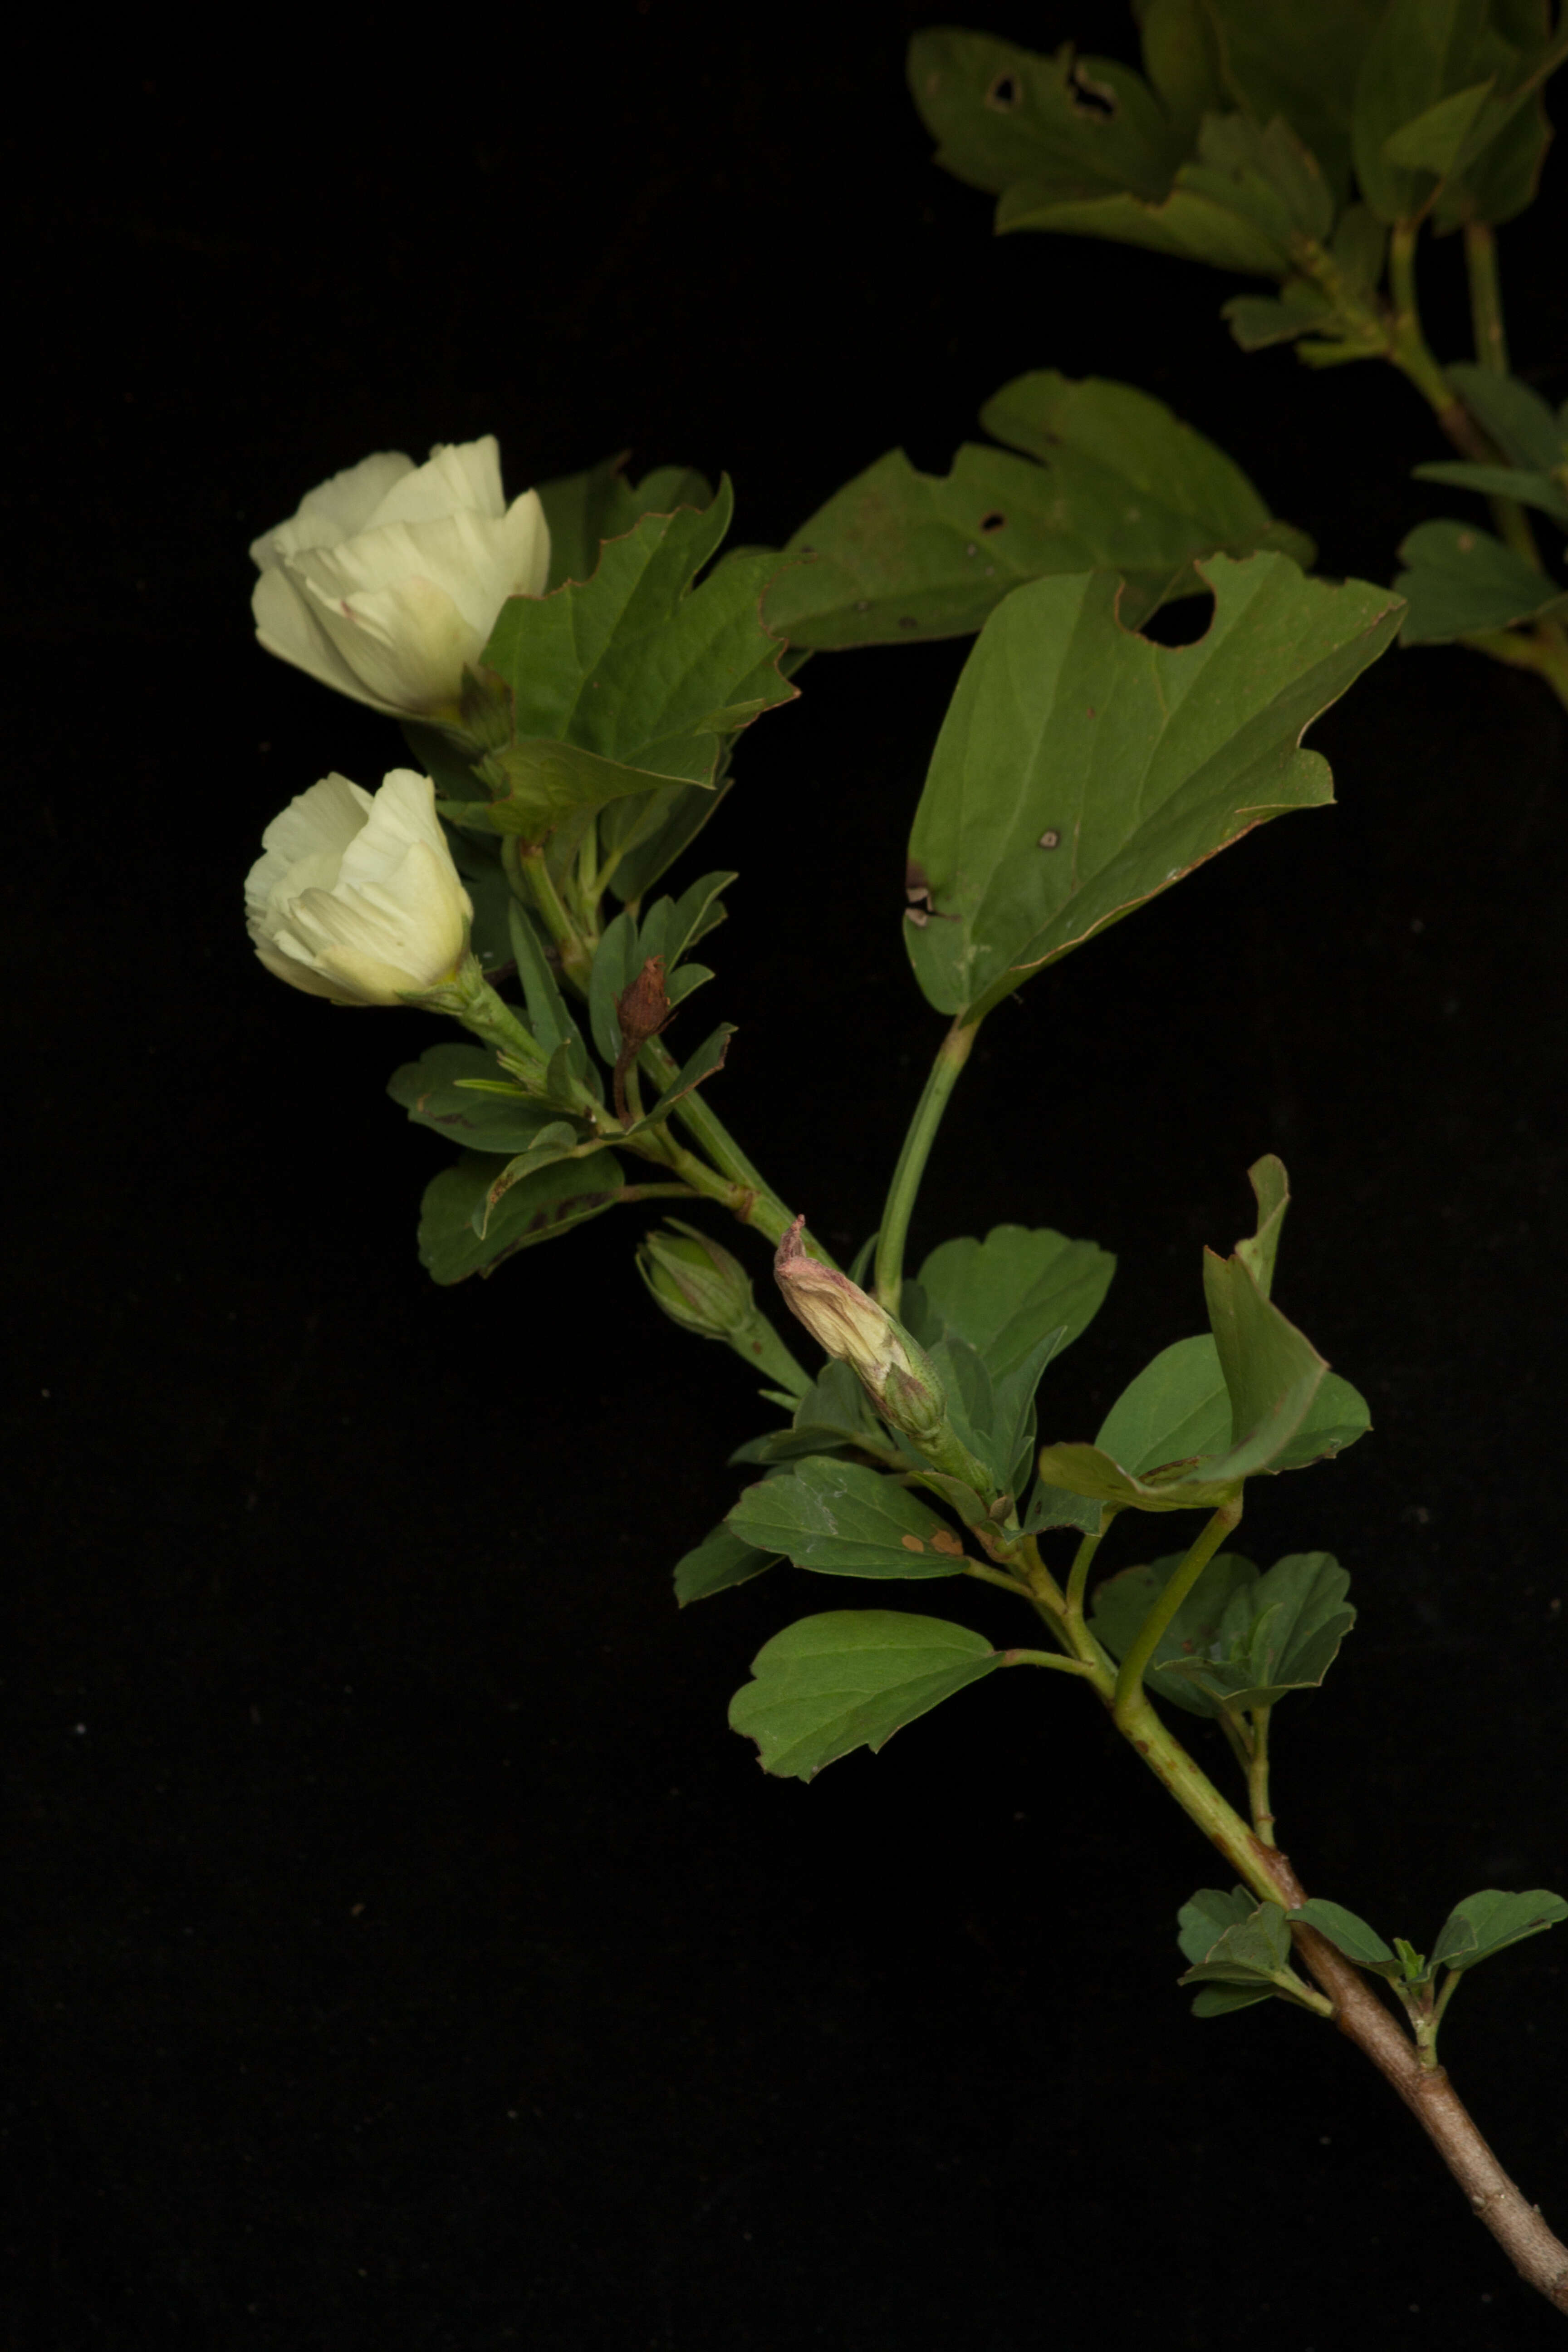 Image of Mallow or Hibiscus Family